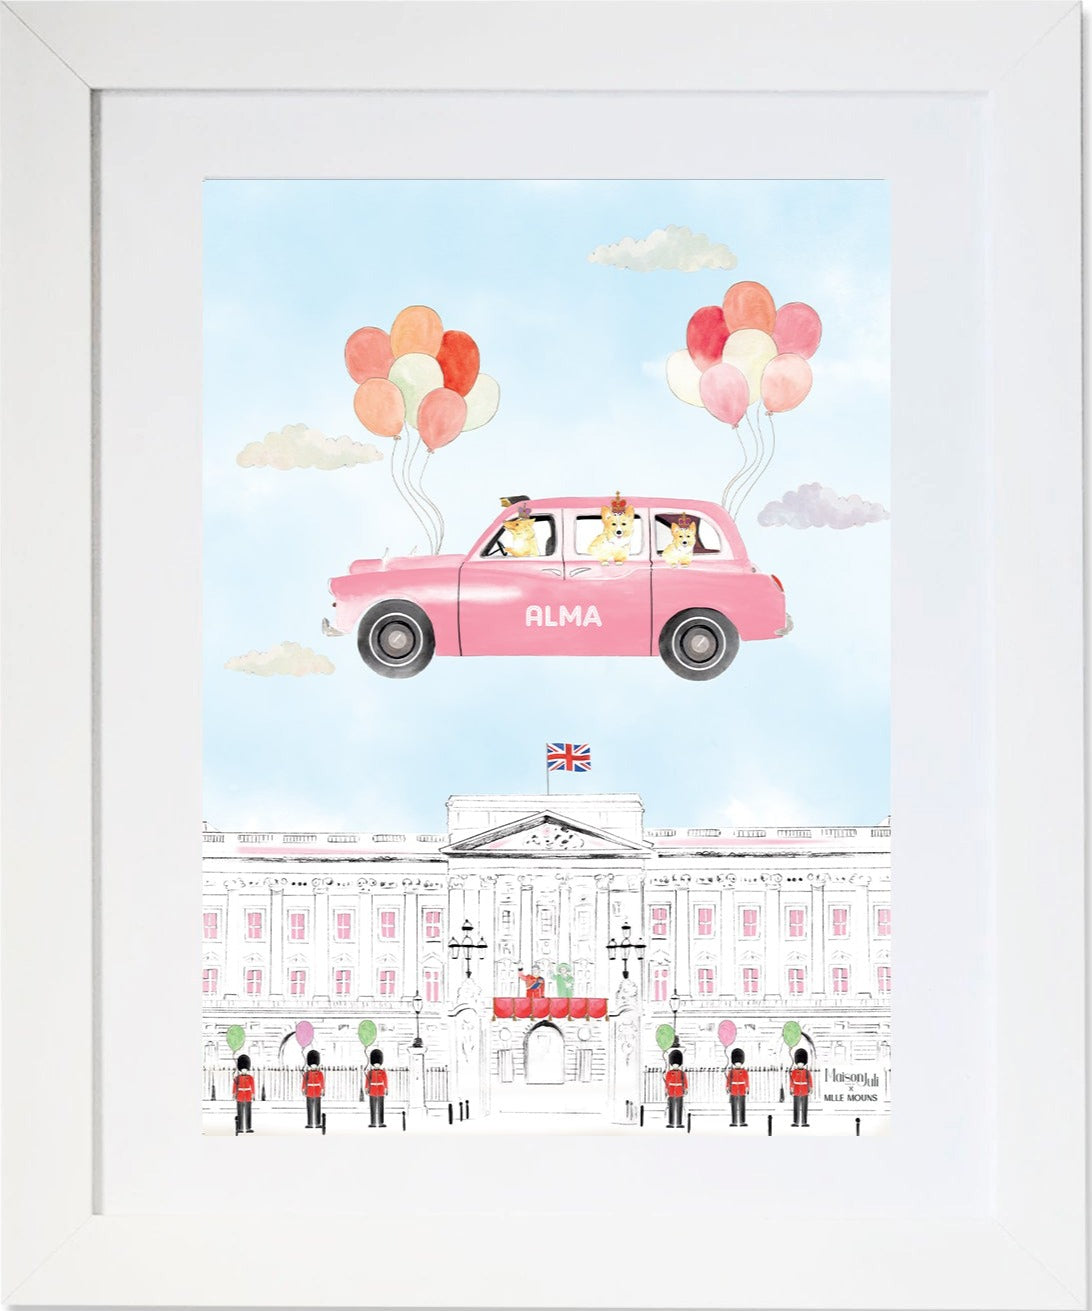 The Flying pink Black Cab of London